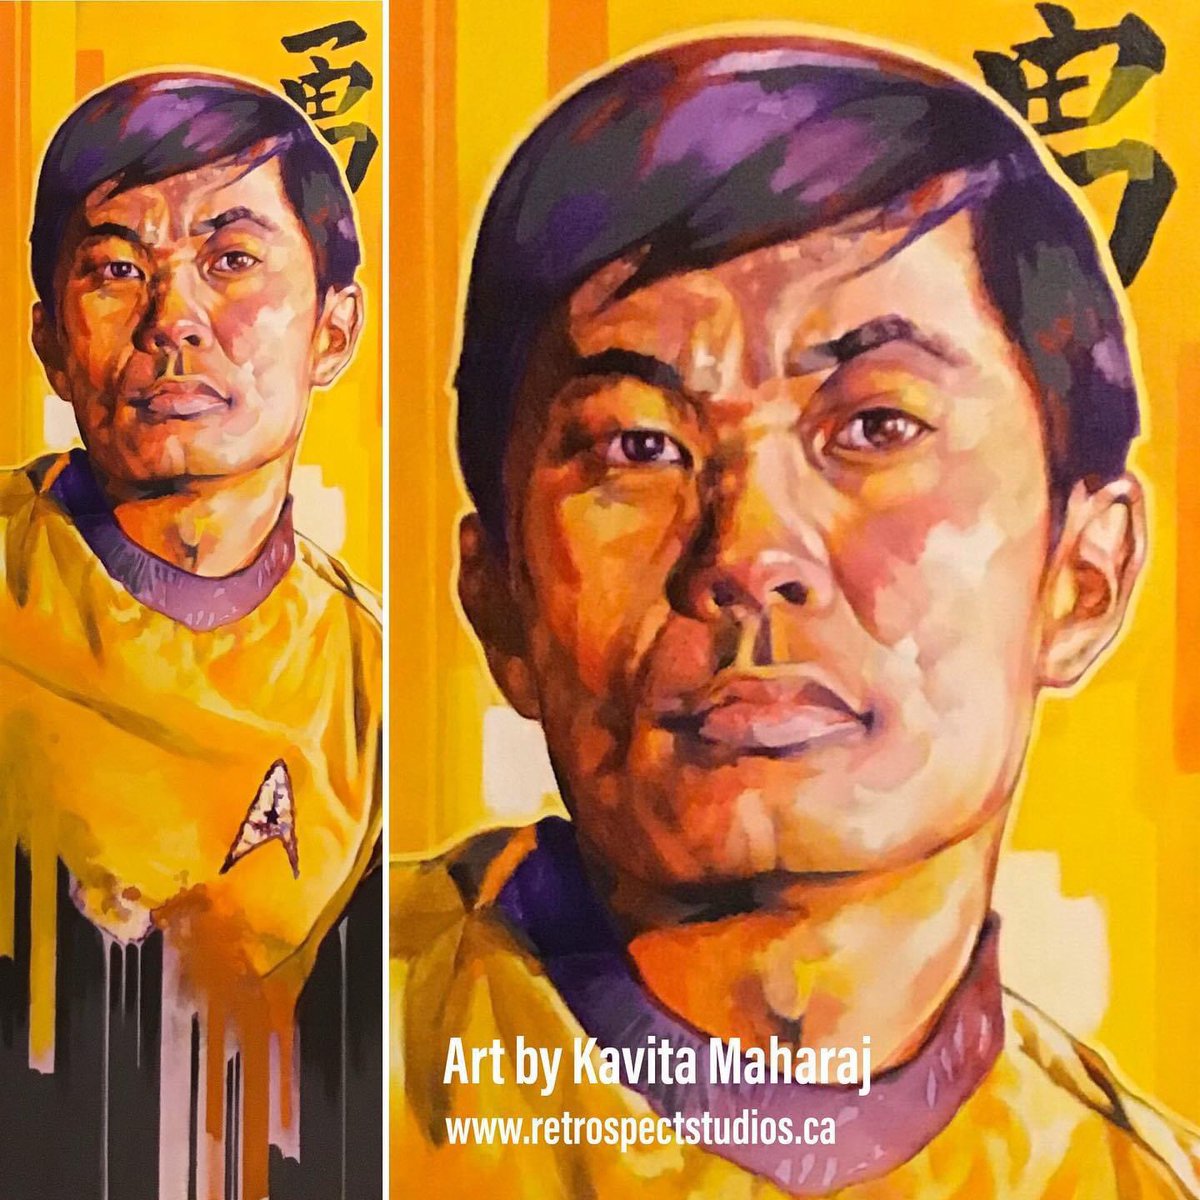 Happy Birthday @GeorgeTakei … thank you for all you’ve done to improve the plight of so many through the years. It was a pleasure working on your painting! ❤️🖖 retrospectstudios.ca/collect

#startrek #StarTrek #StarTrekTOS #fanart #scifiart #CanadianArt